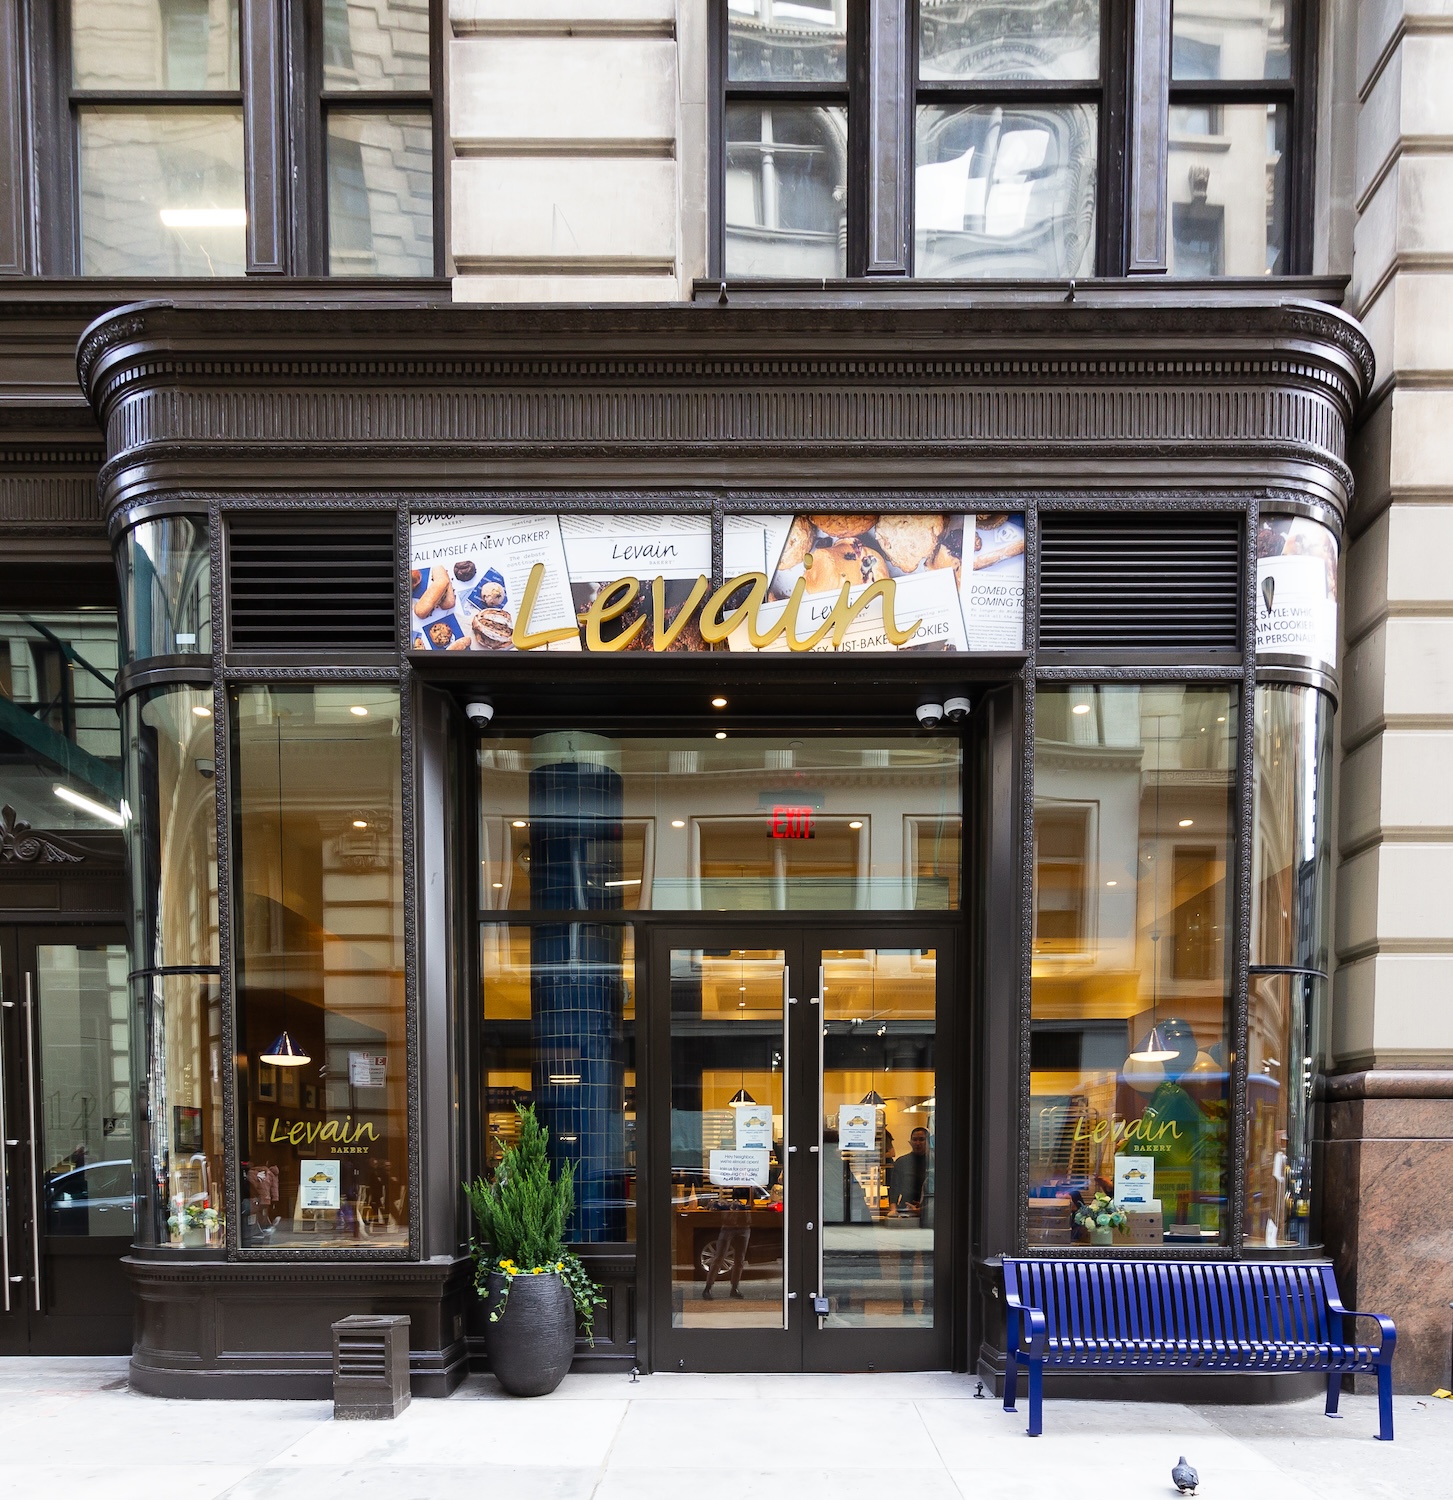 New Levain storefront at 122 Fifth Avenue, courtesy of The Bromley Companies